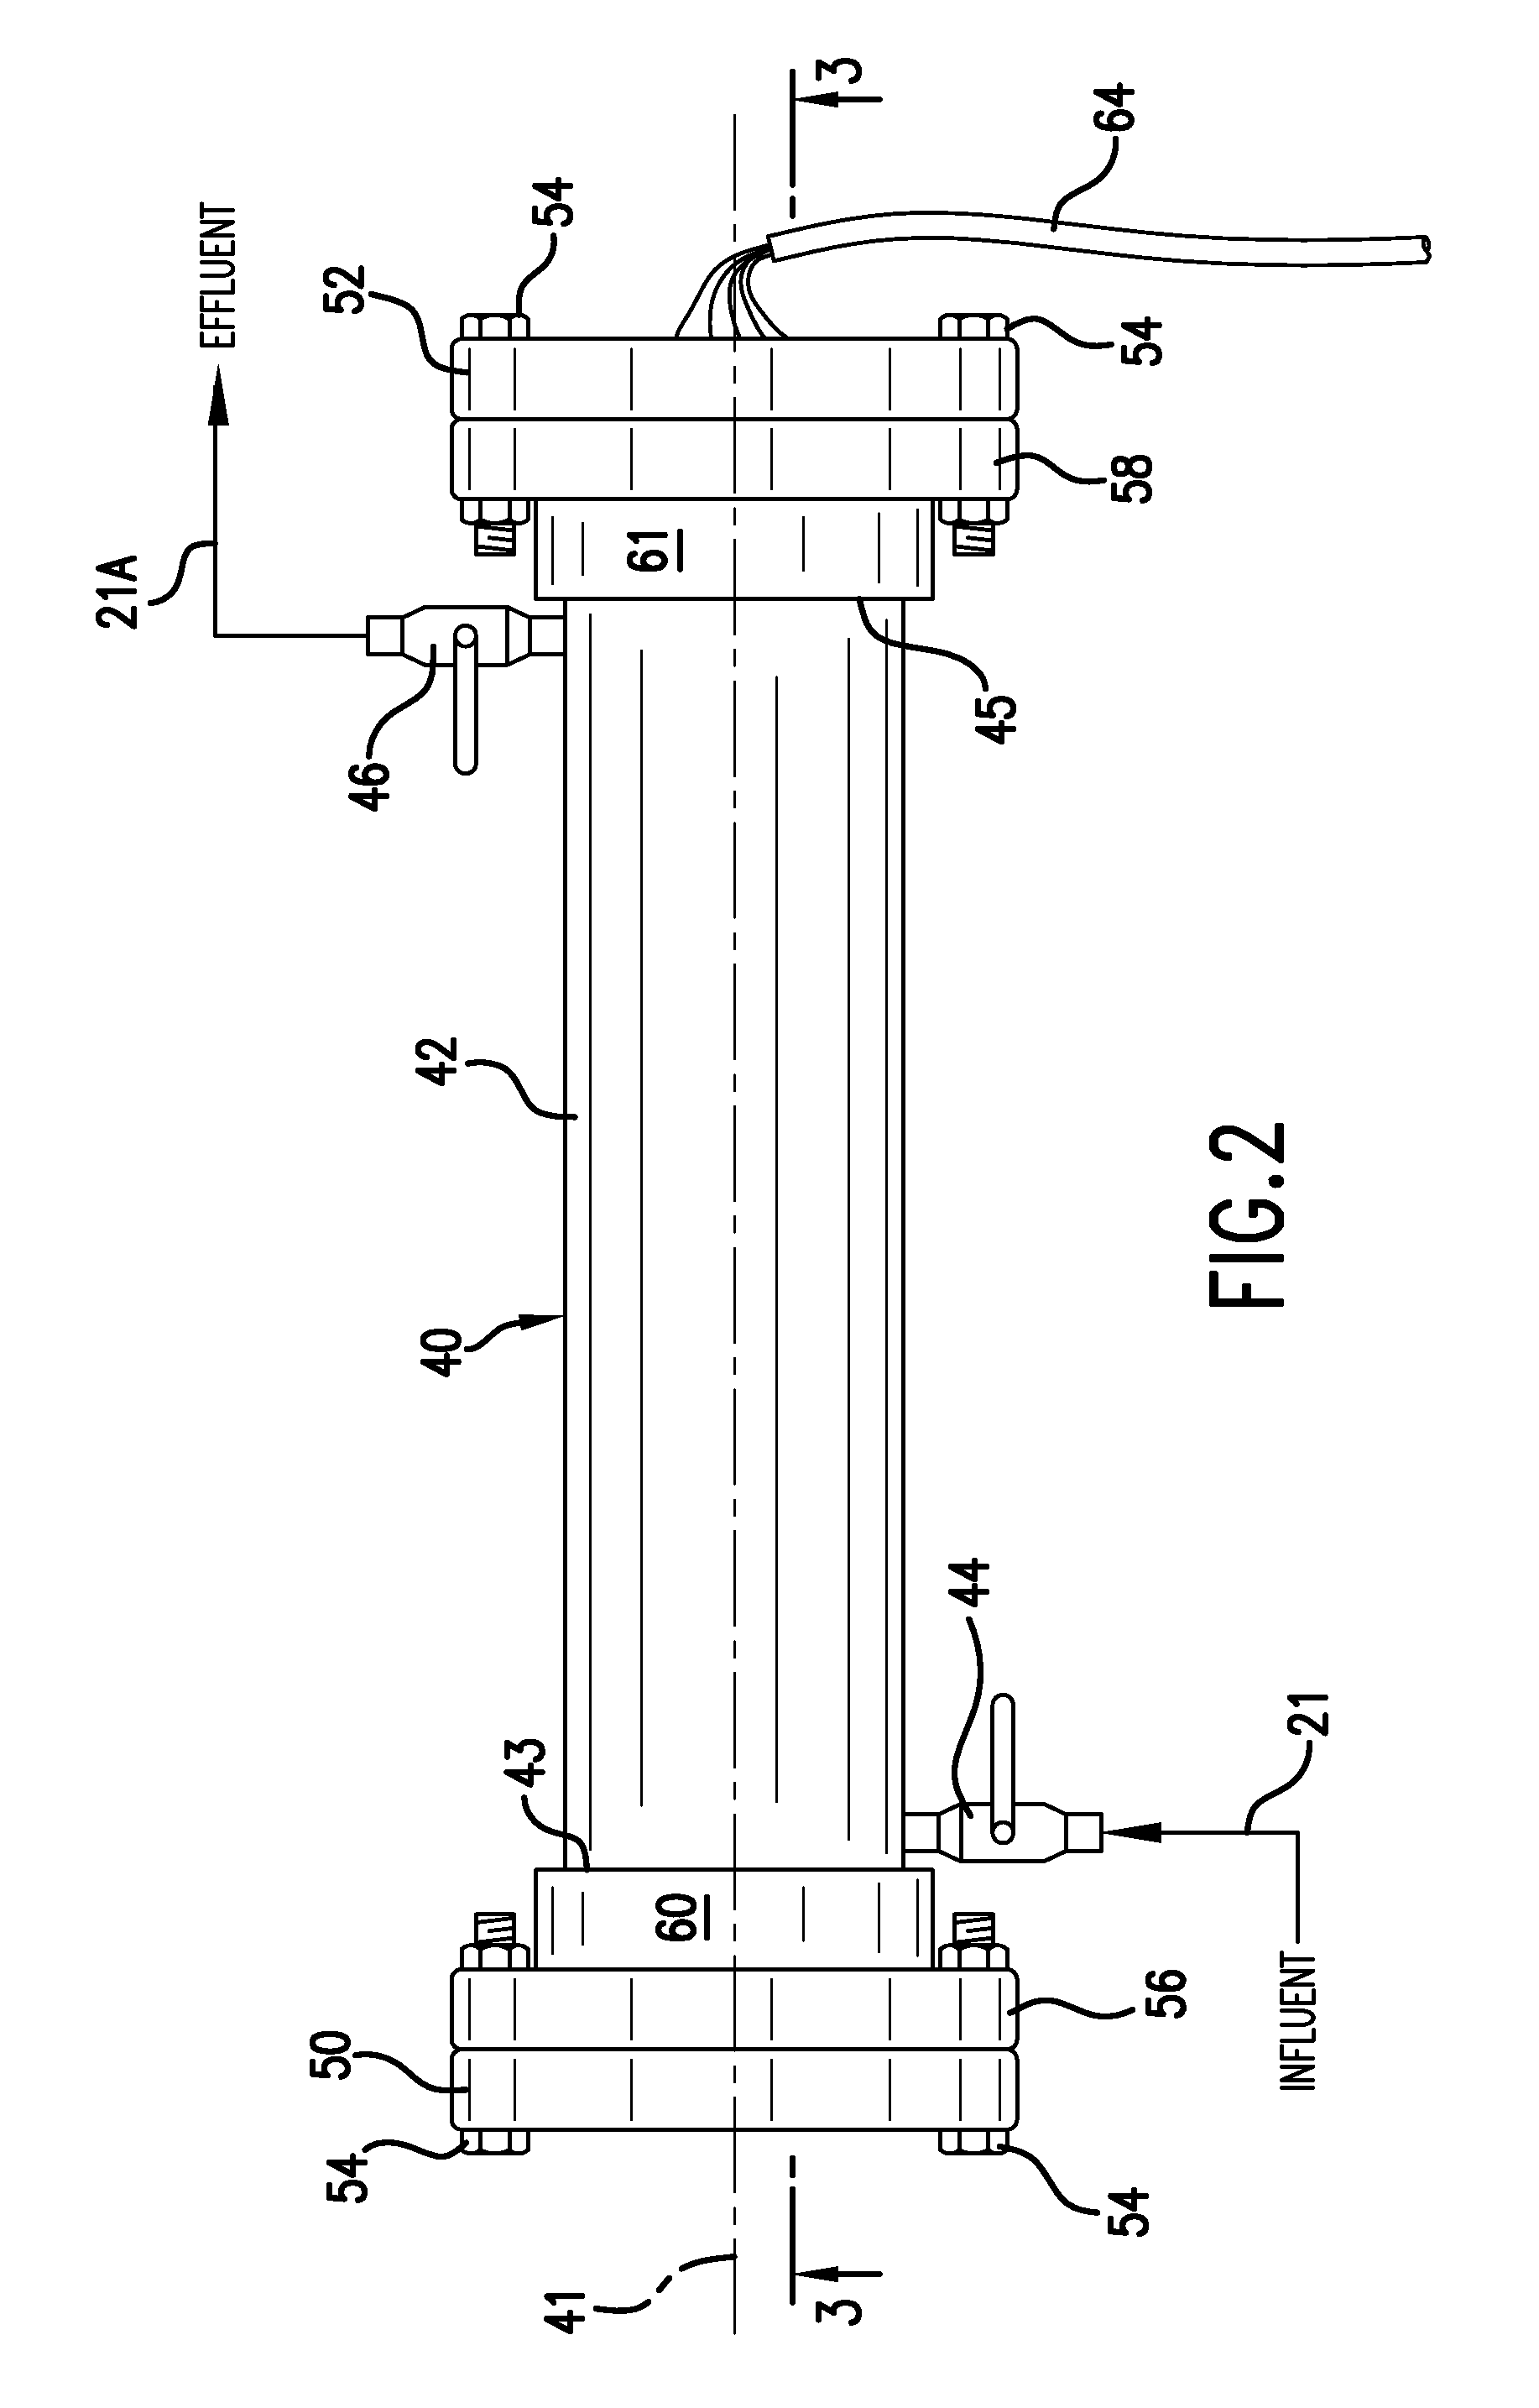 Electrochemical system and method for the treatment of water and wastewater